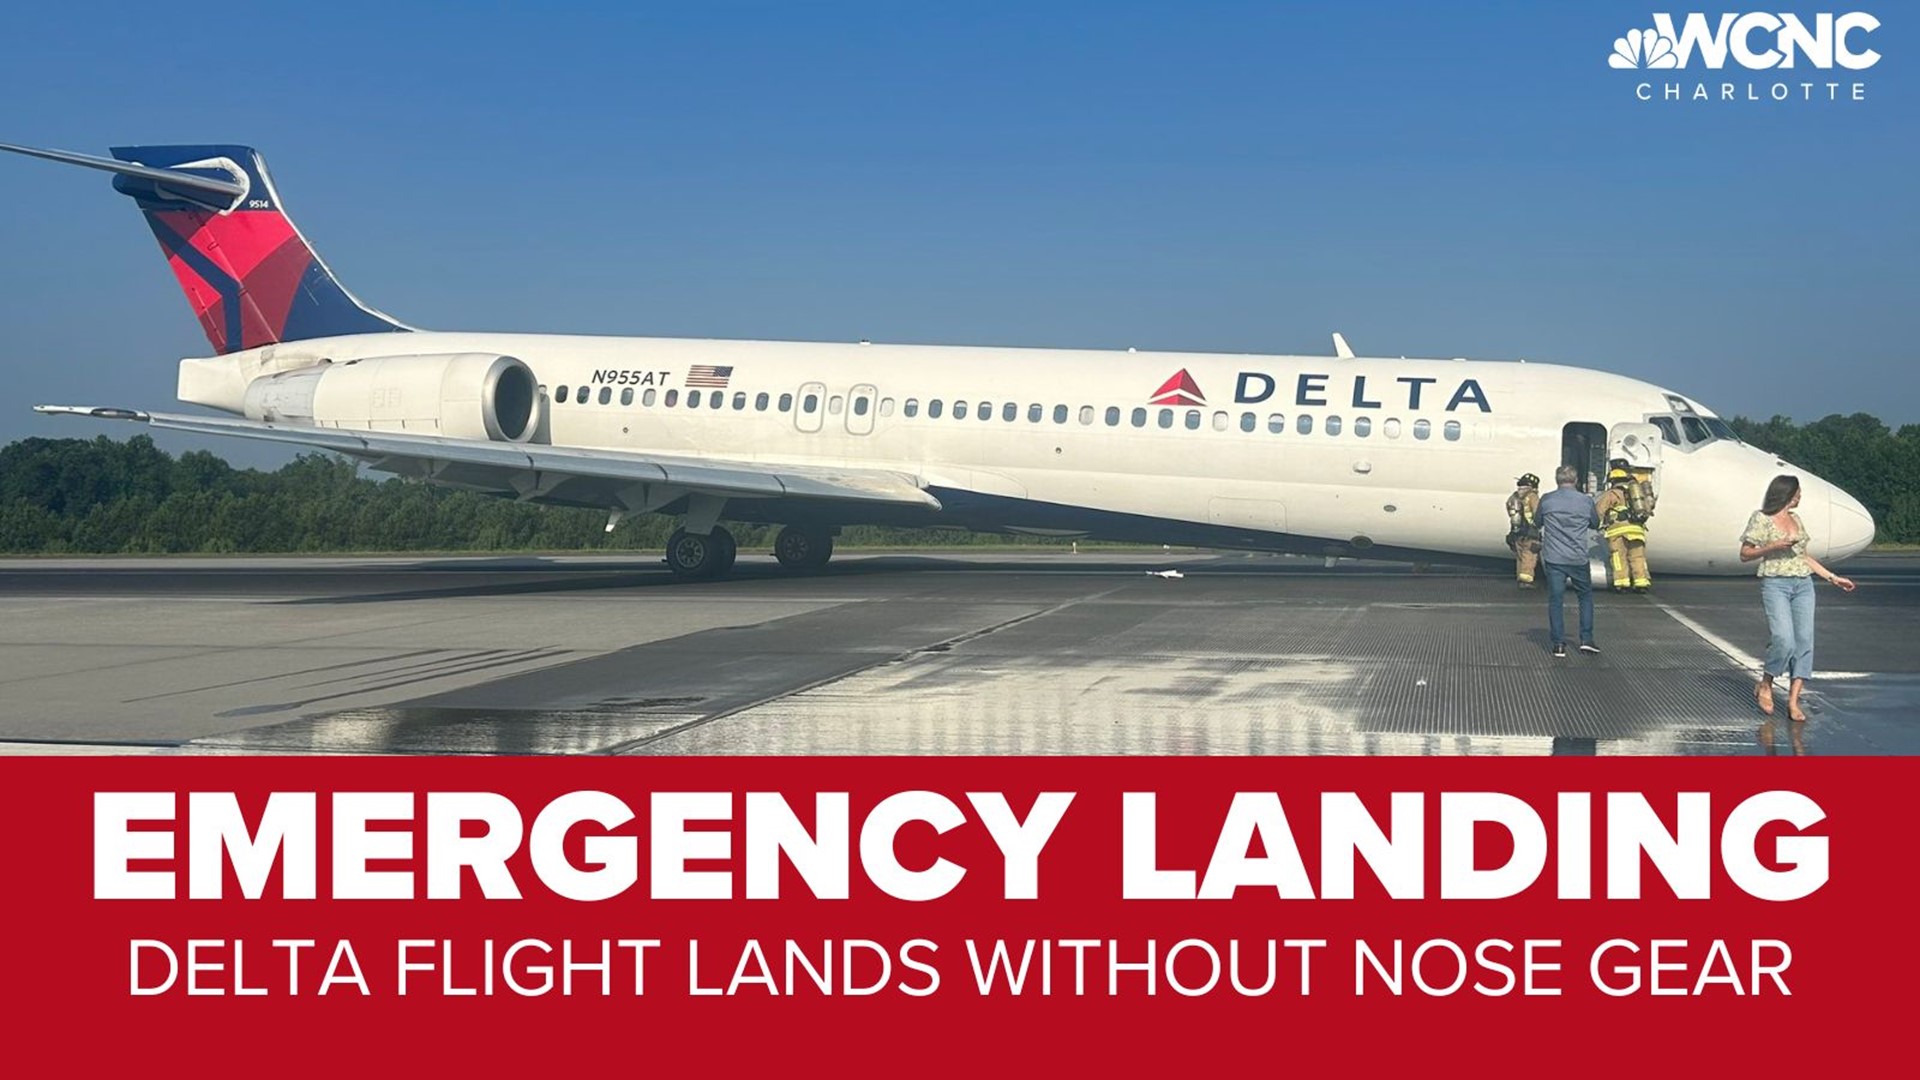 Delta Air Lines flight 1092 landed safely at Charlotte Douglas Wednesday morning without the nose gear.  Airport officials confirmed no one was hurt.